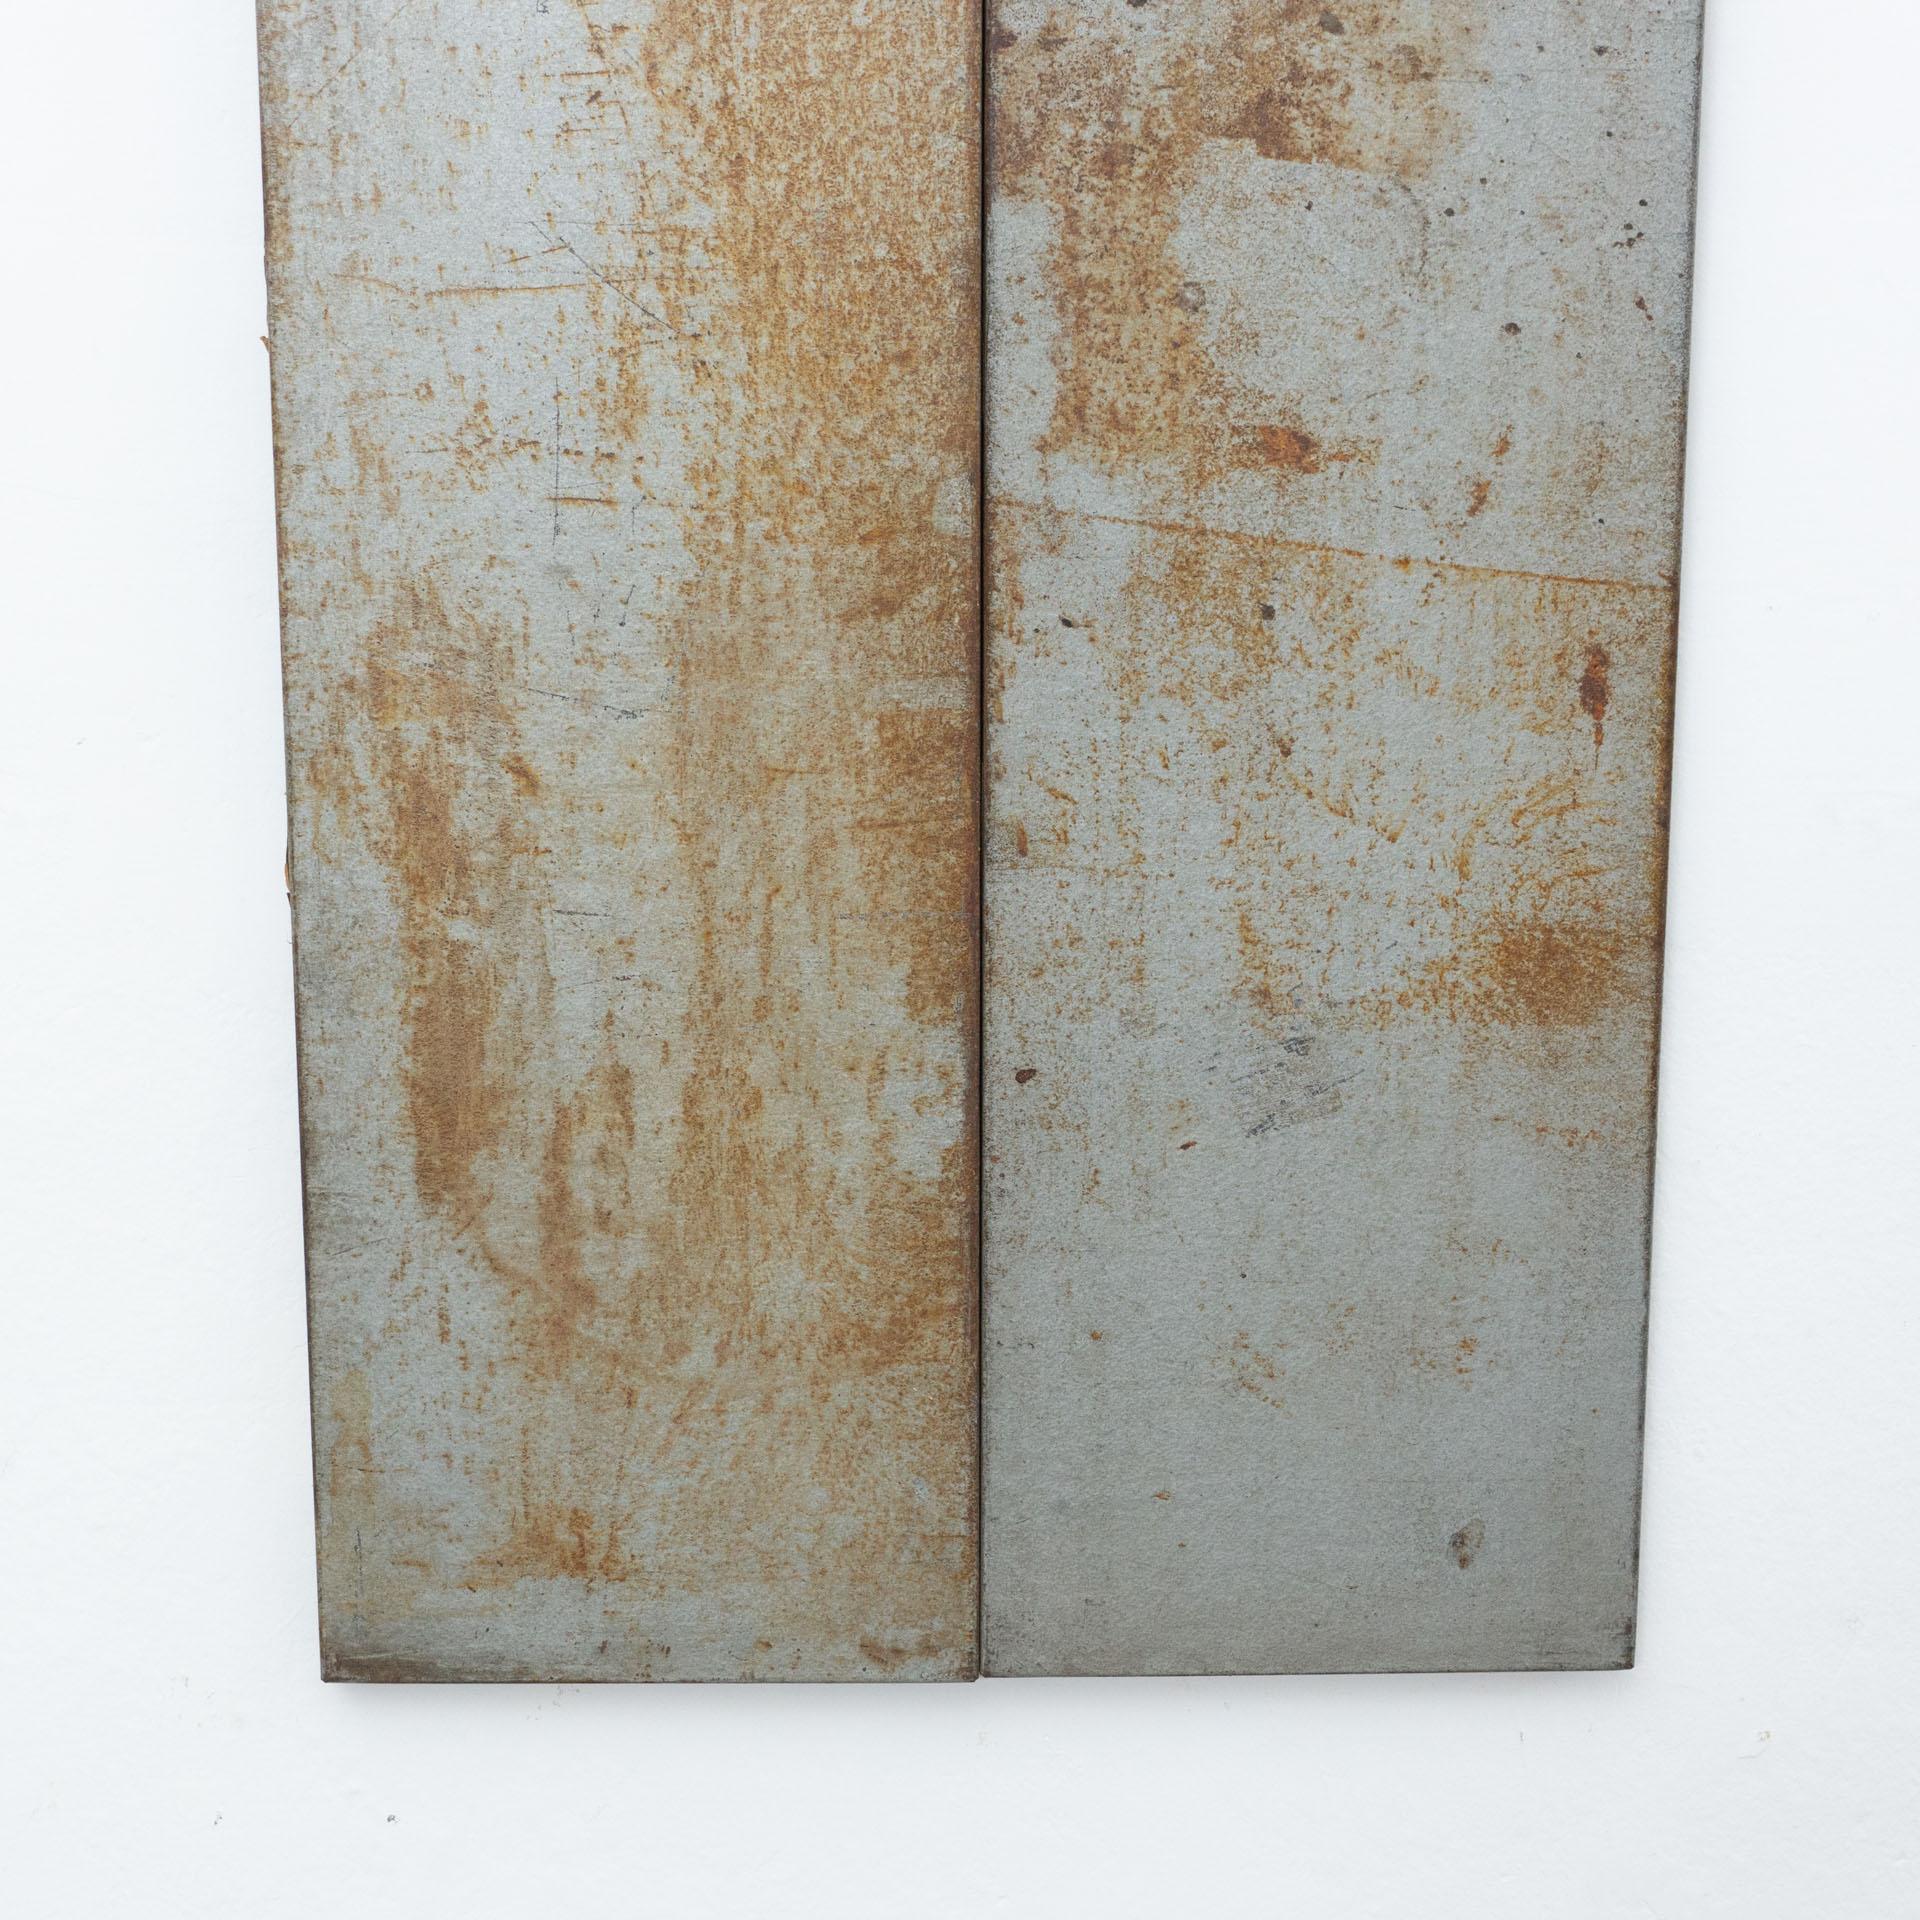 Ramon Horts Minimalist Contemporary Artwork N2 In Good Condition For Sale In Barcelona, Barcelona